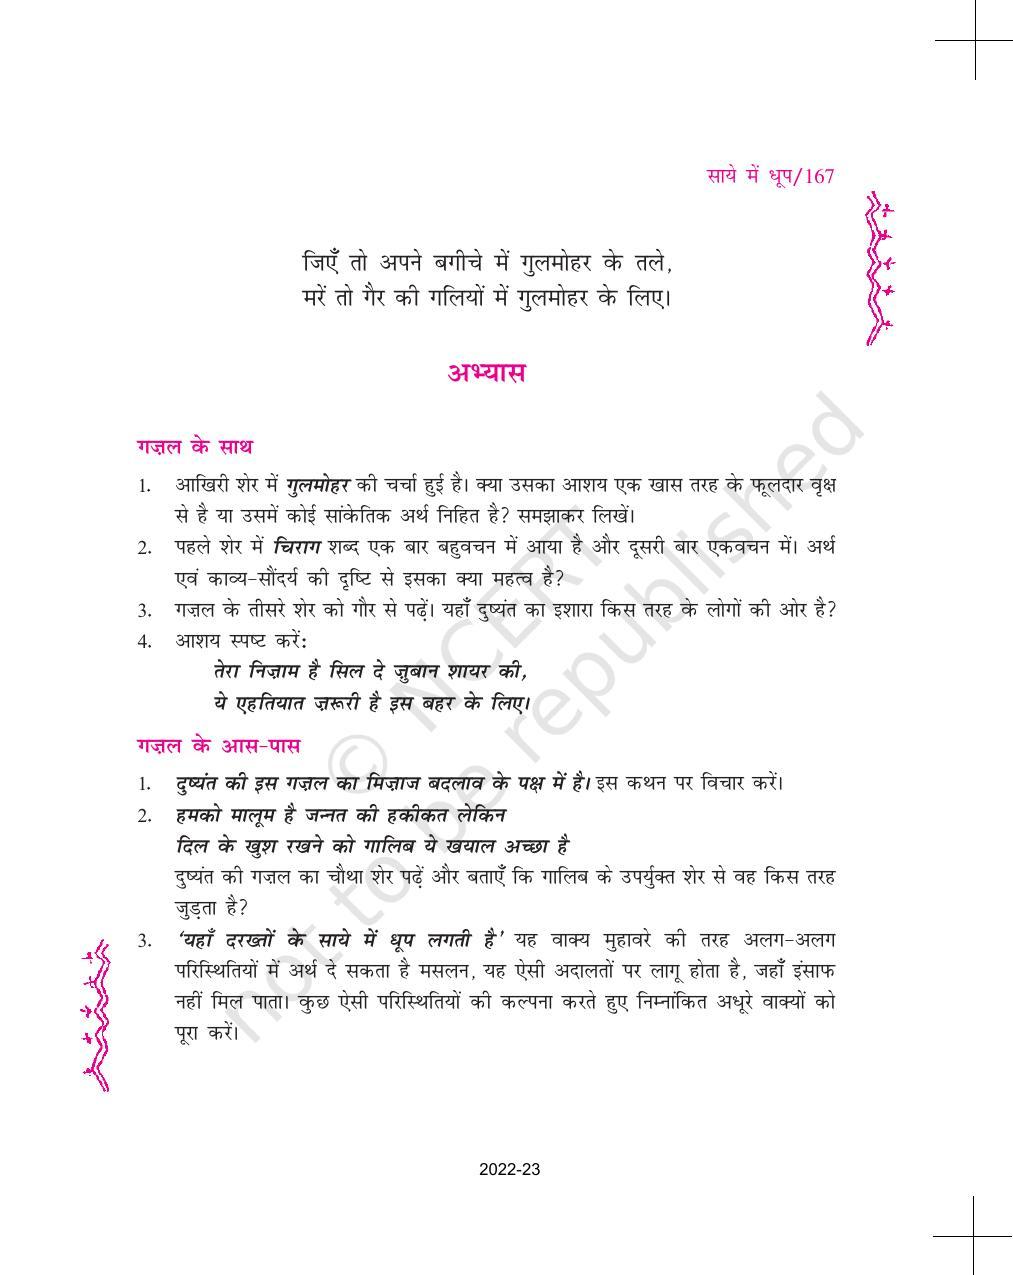 NCERT Book for Class 11 Hindi Aroh Chapter 17 दुष्यंत कुमार - Page 4